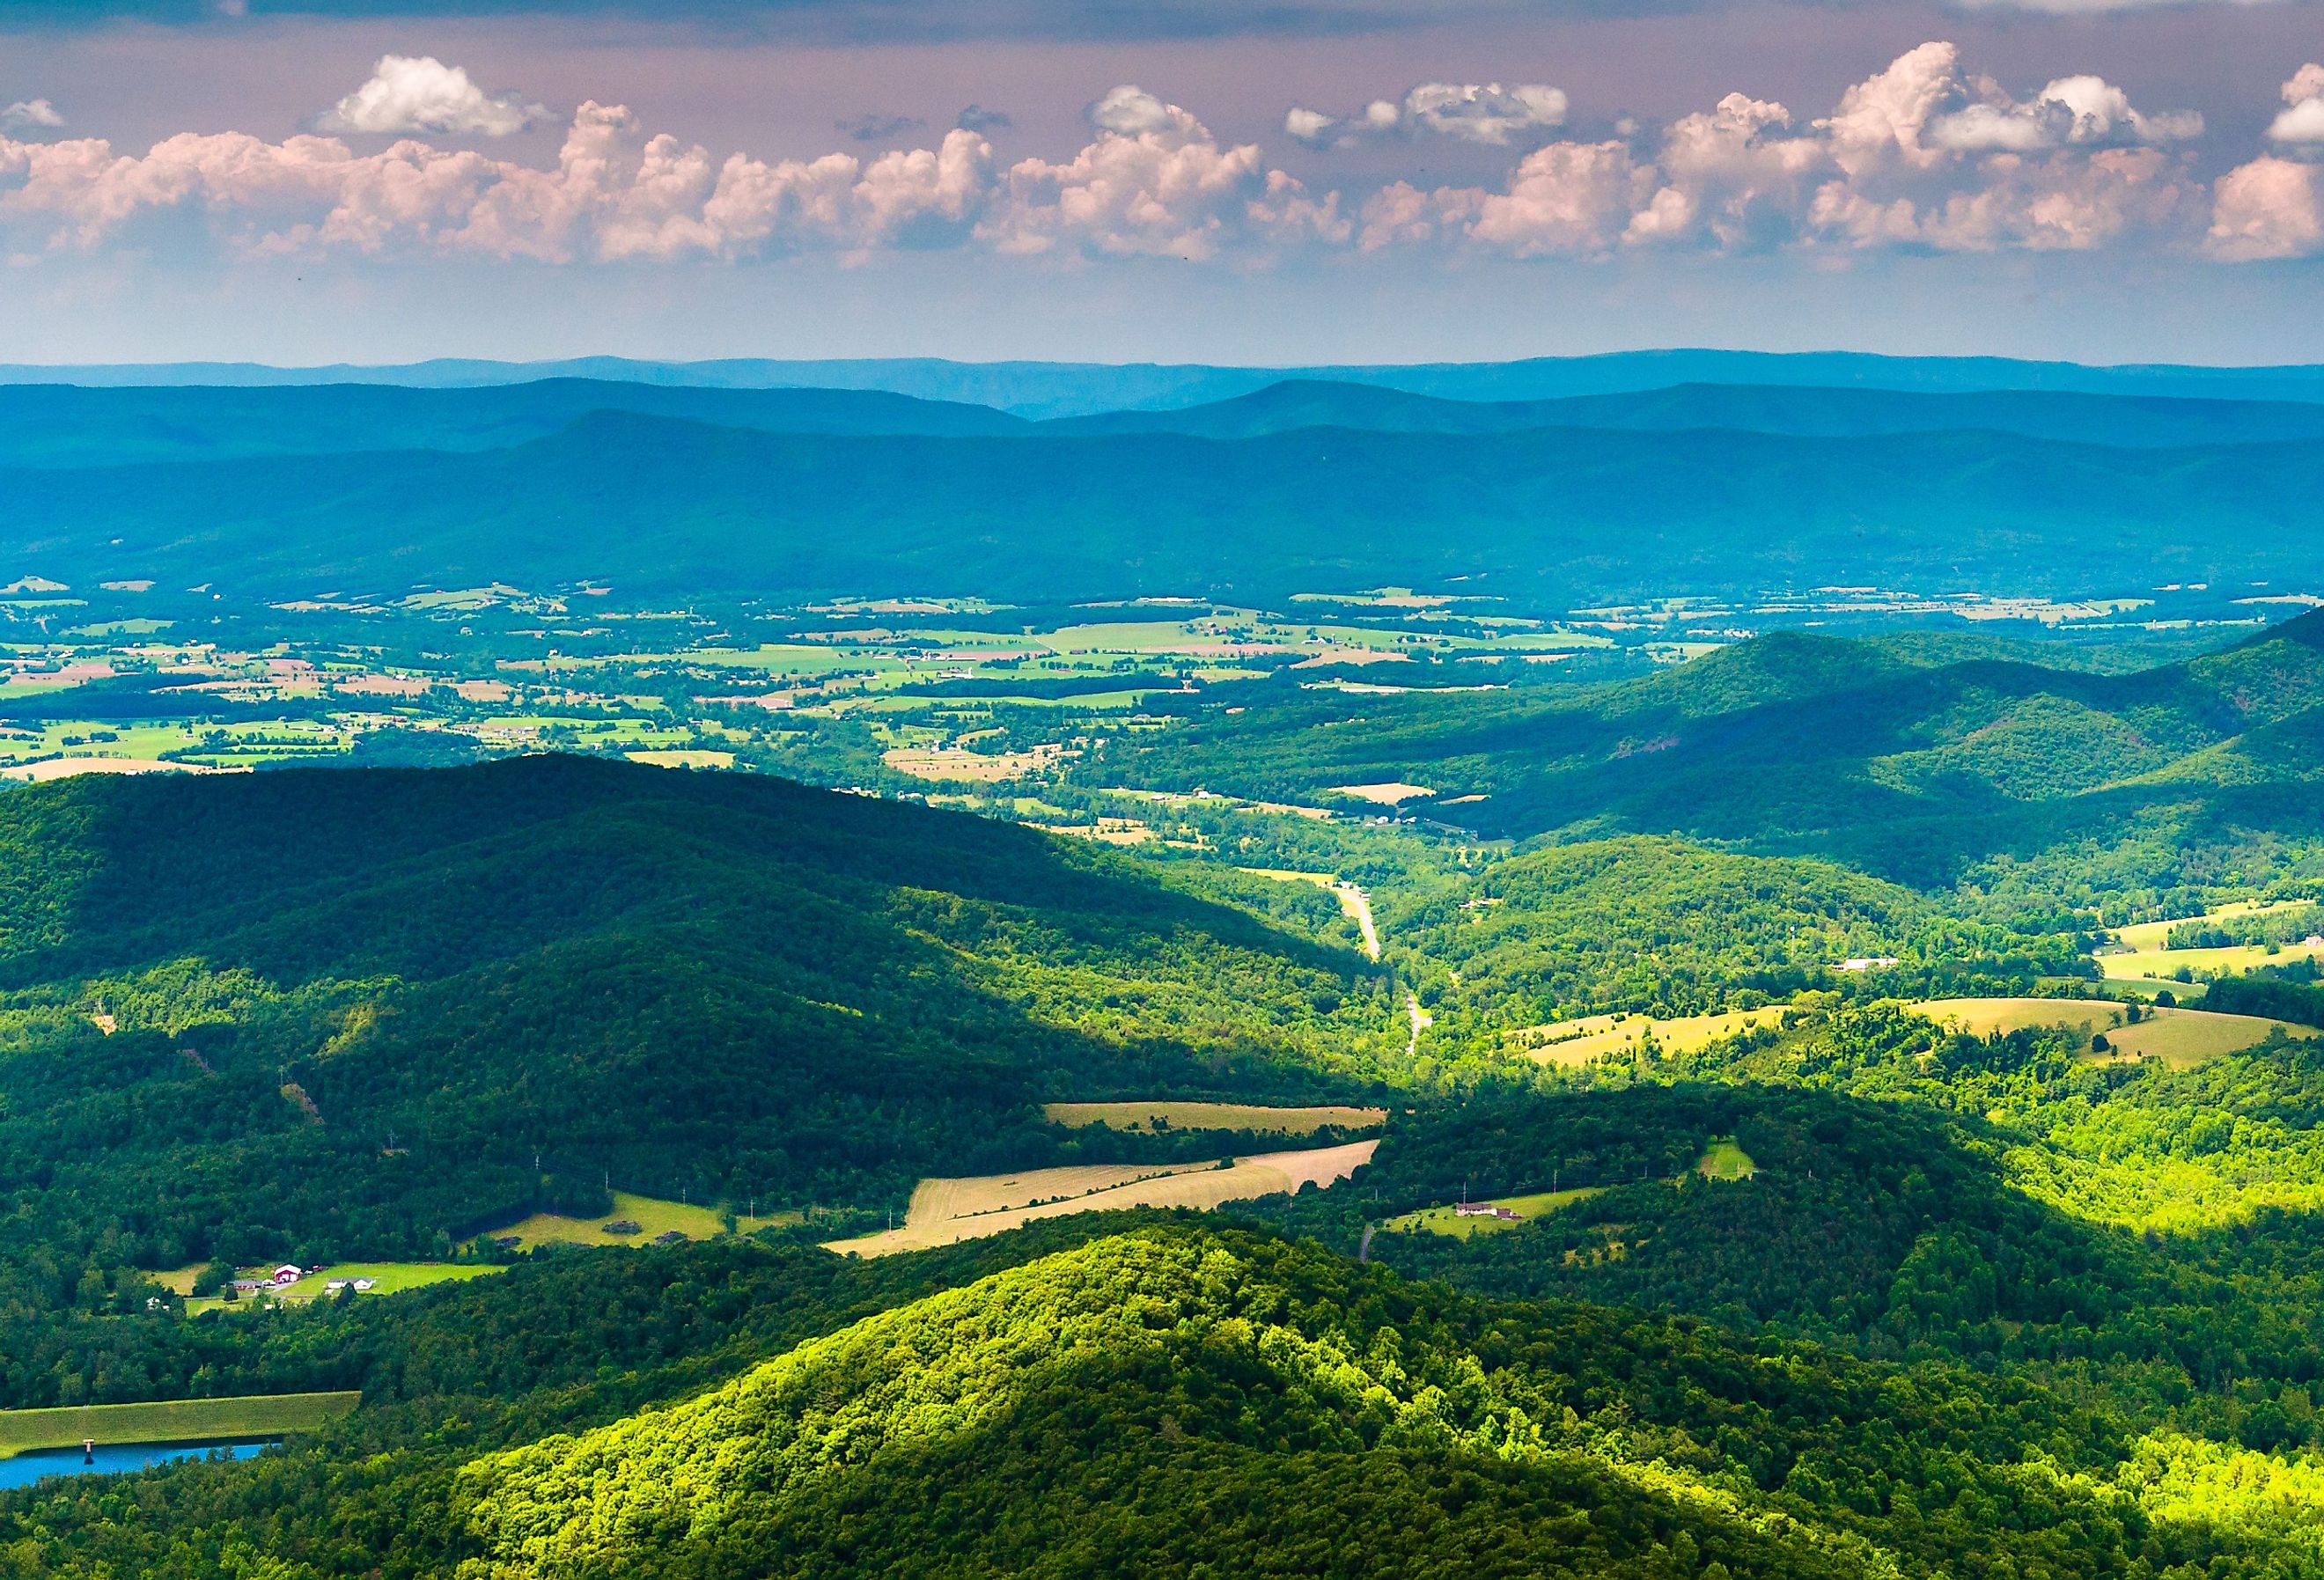 Clouds cast shadows over the Appalachian Mountains and Shenandoah Valley, seen from Shenandoah National Park, Virginia. Image credit Jon Bilous via Shutterstock.